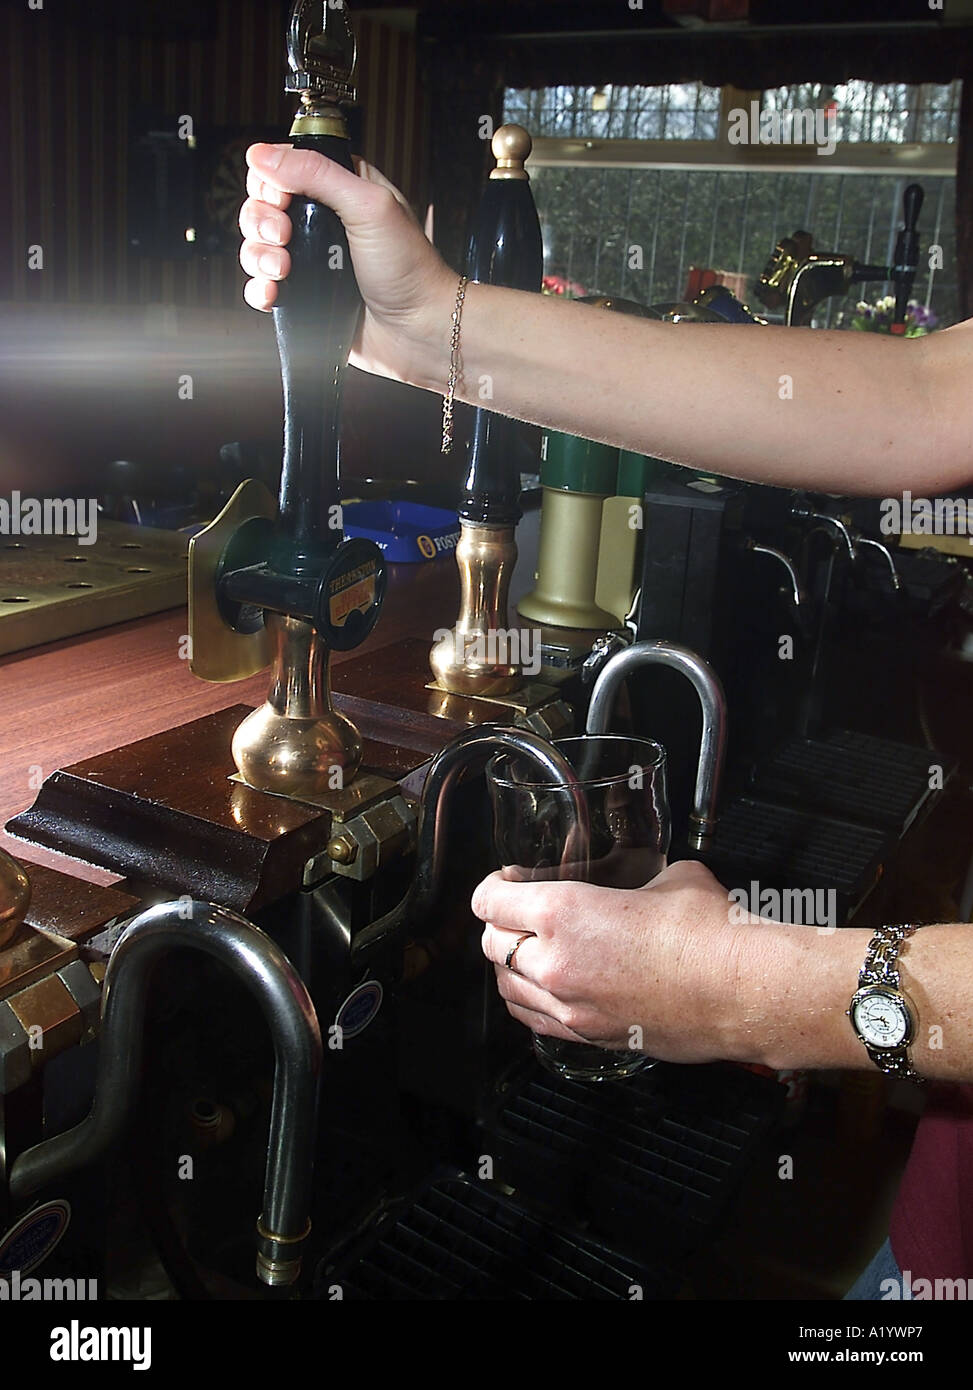 Pulling a pint of draught beer in an English pub Stock Photo